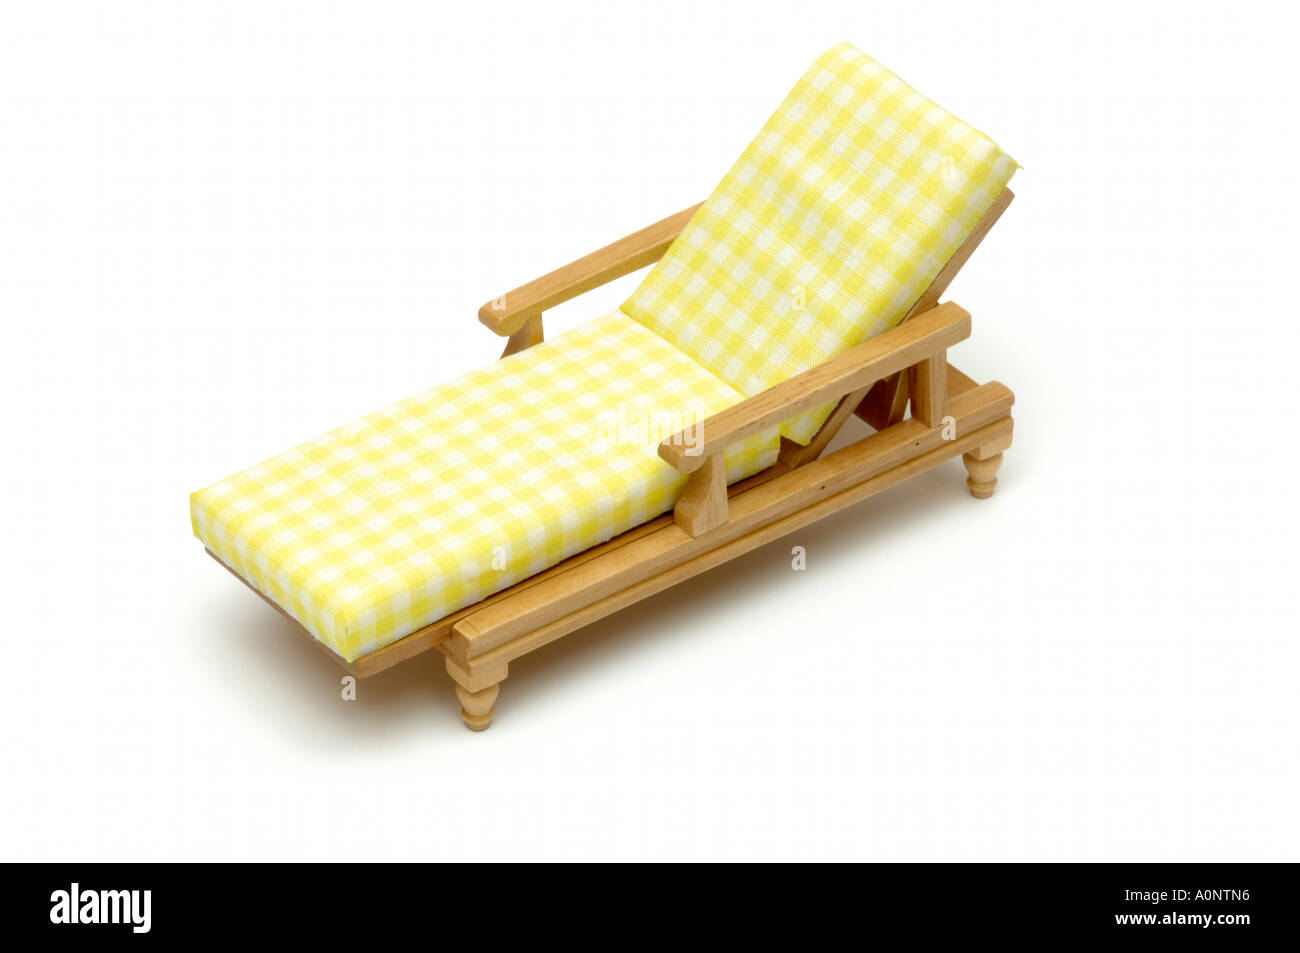 Oriental sun bathing lounge wooden chair on white background Stock Photo -  Alamy